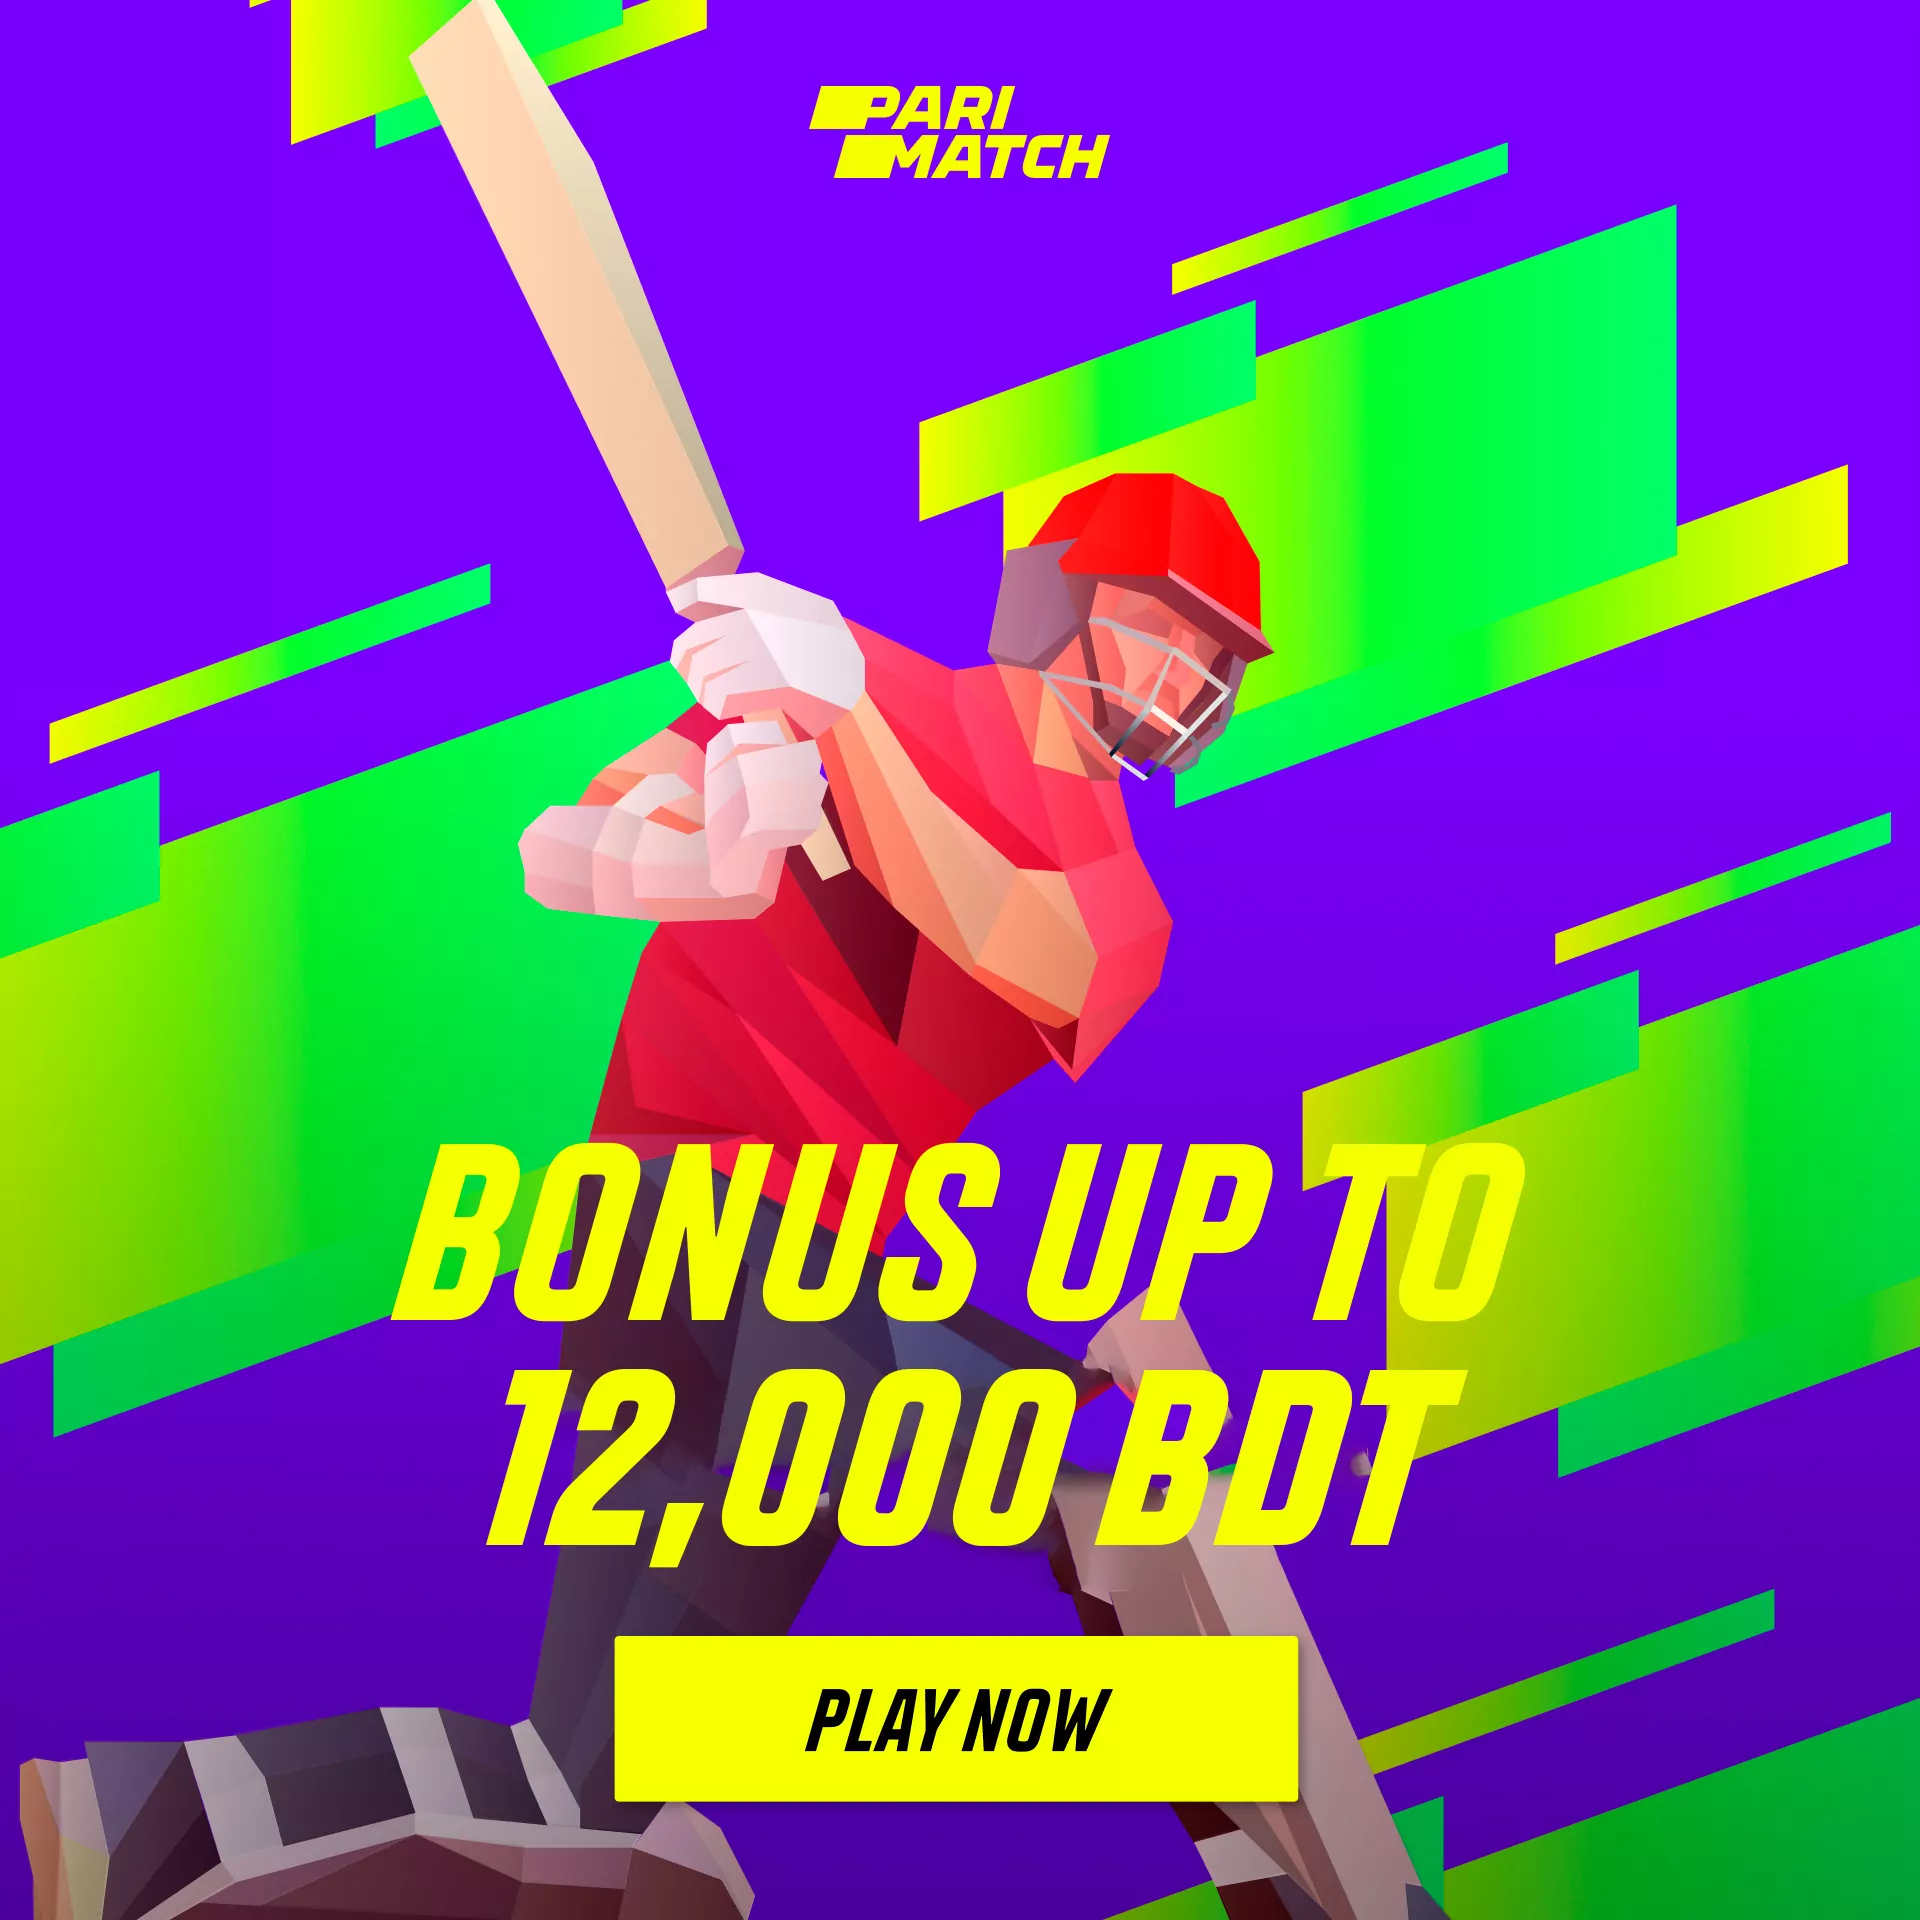 You can get the bonus for sports betting at Parimatch.